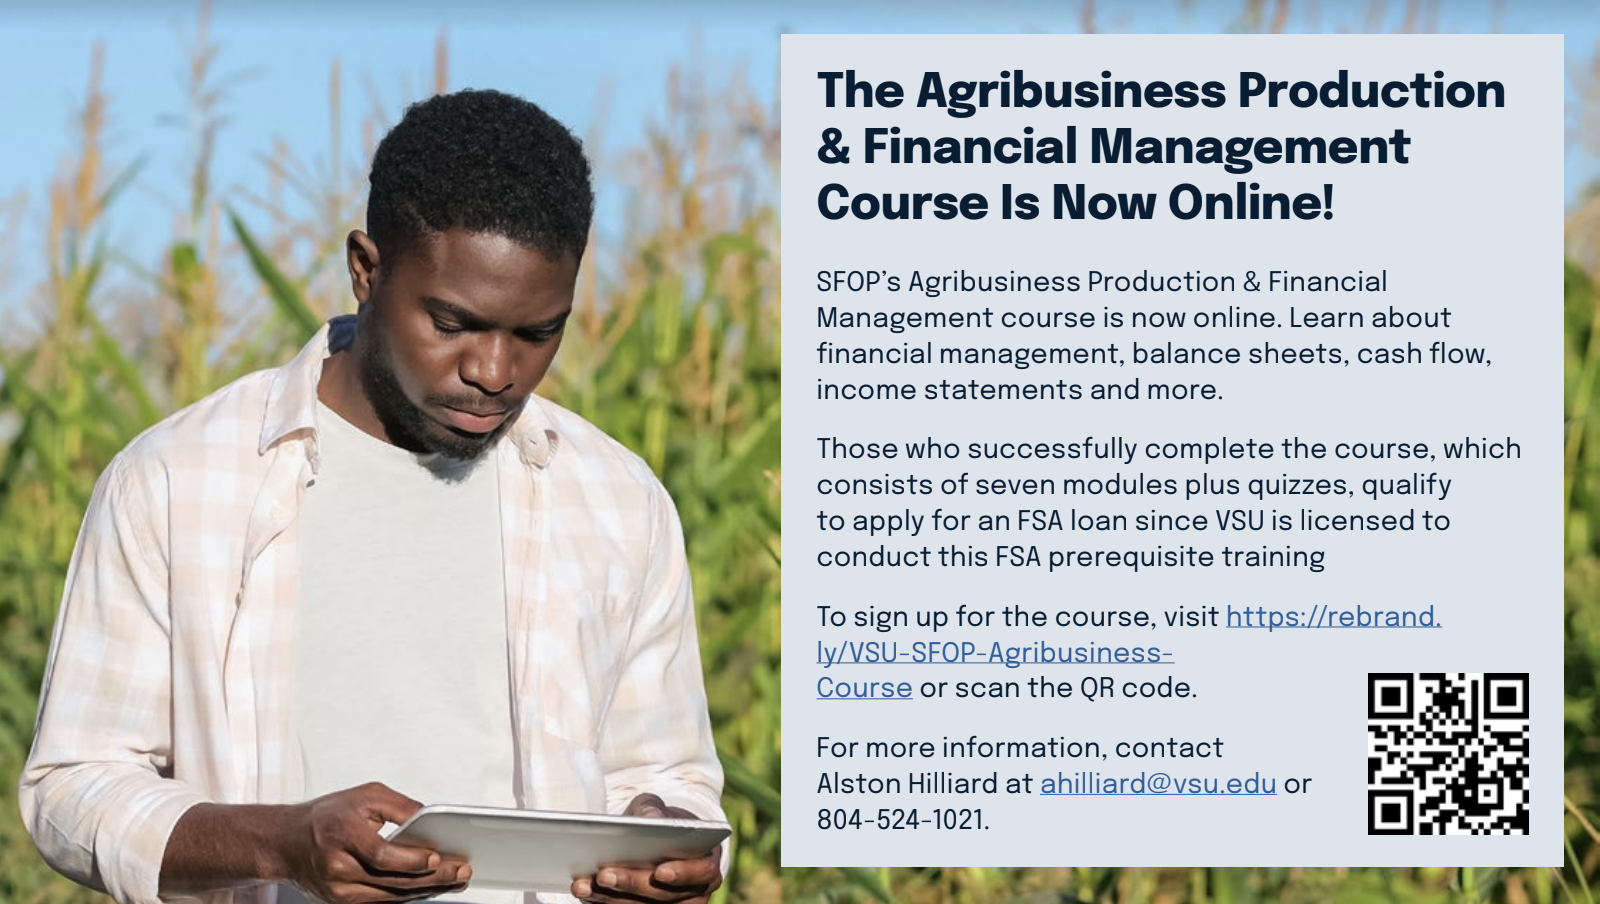 The Agribusiness Production & Financial Management Course Is Now Online!